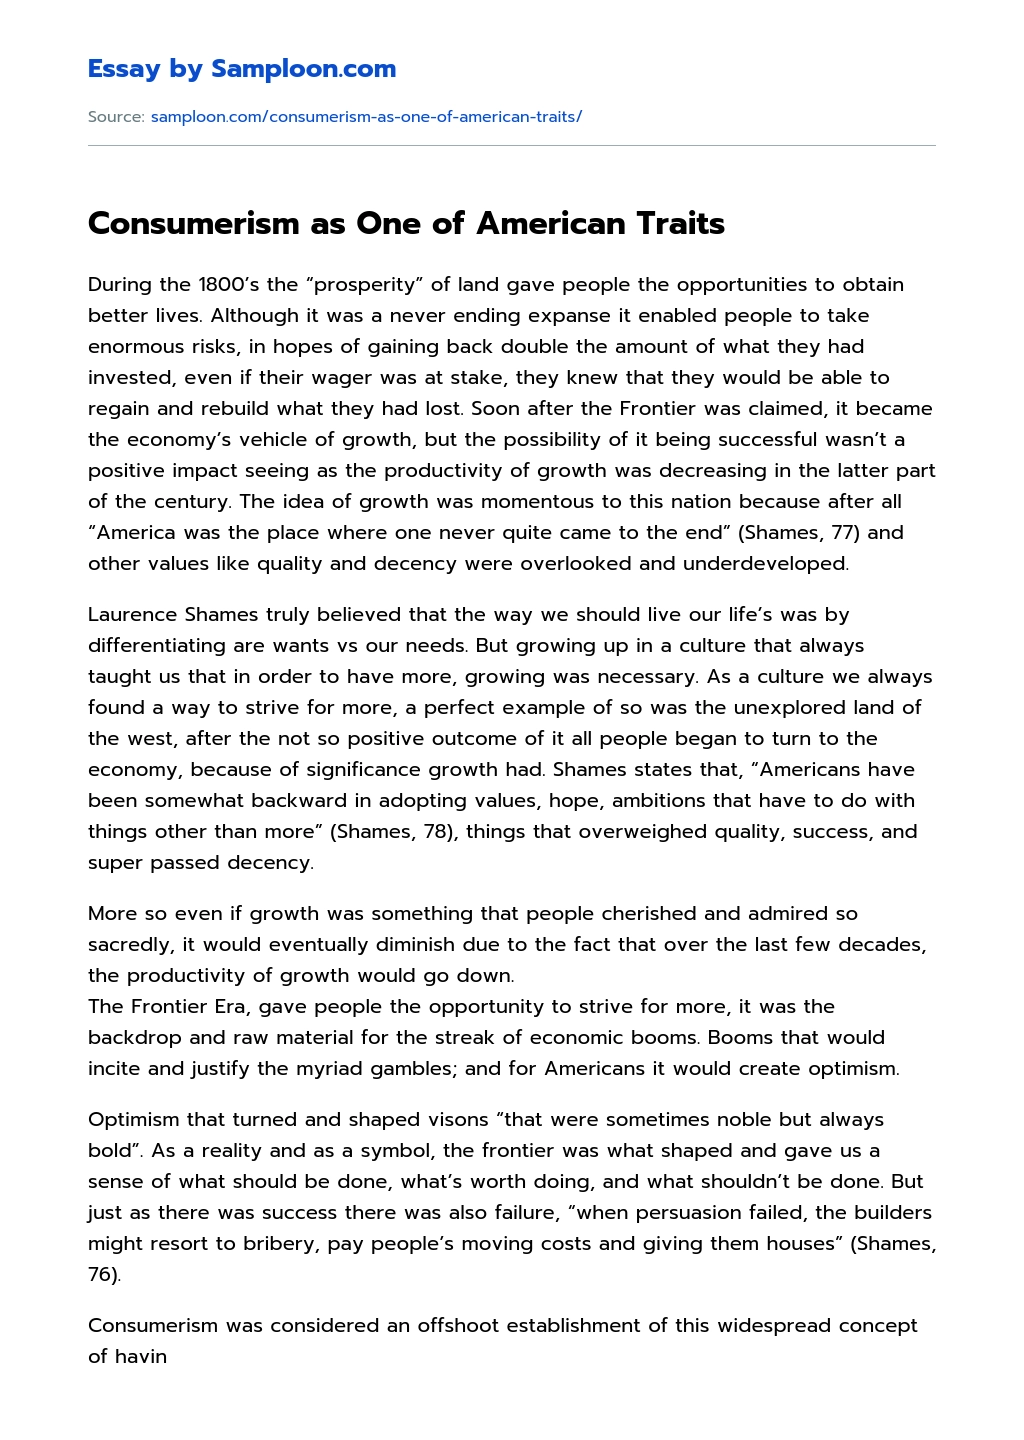 Consumerism as One of American Traits essay